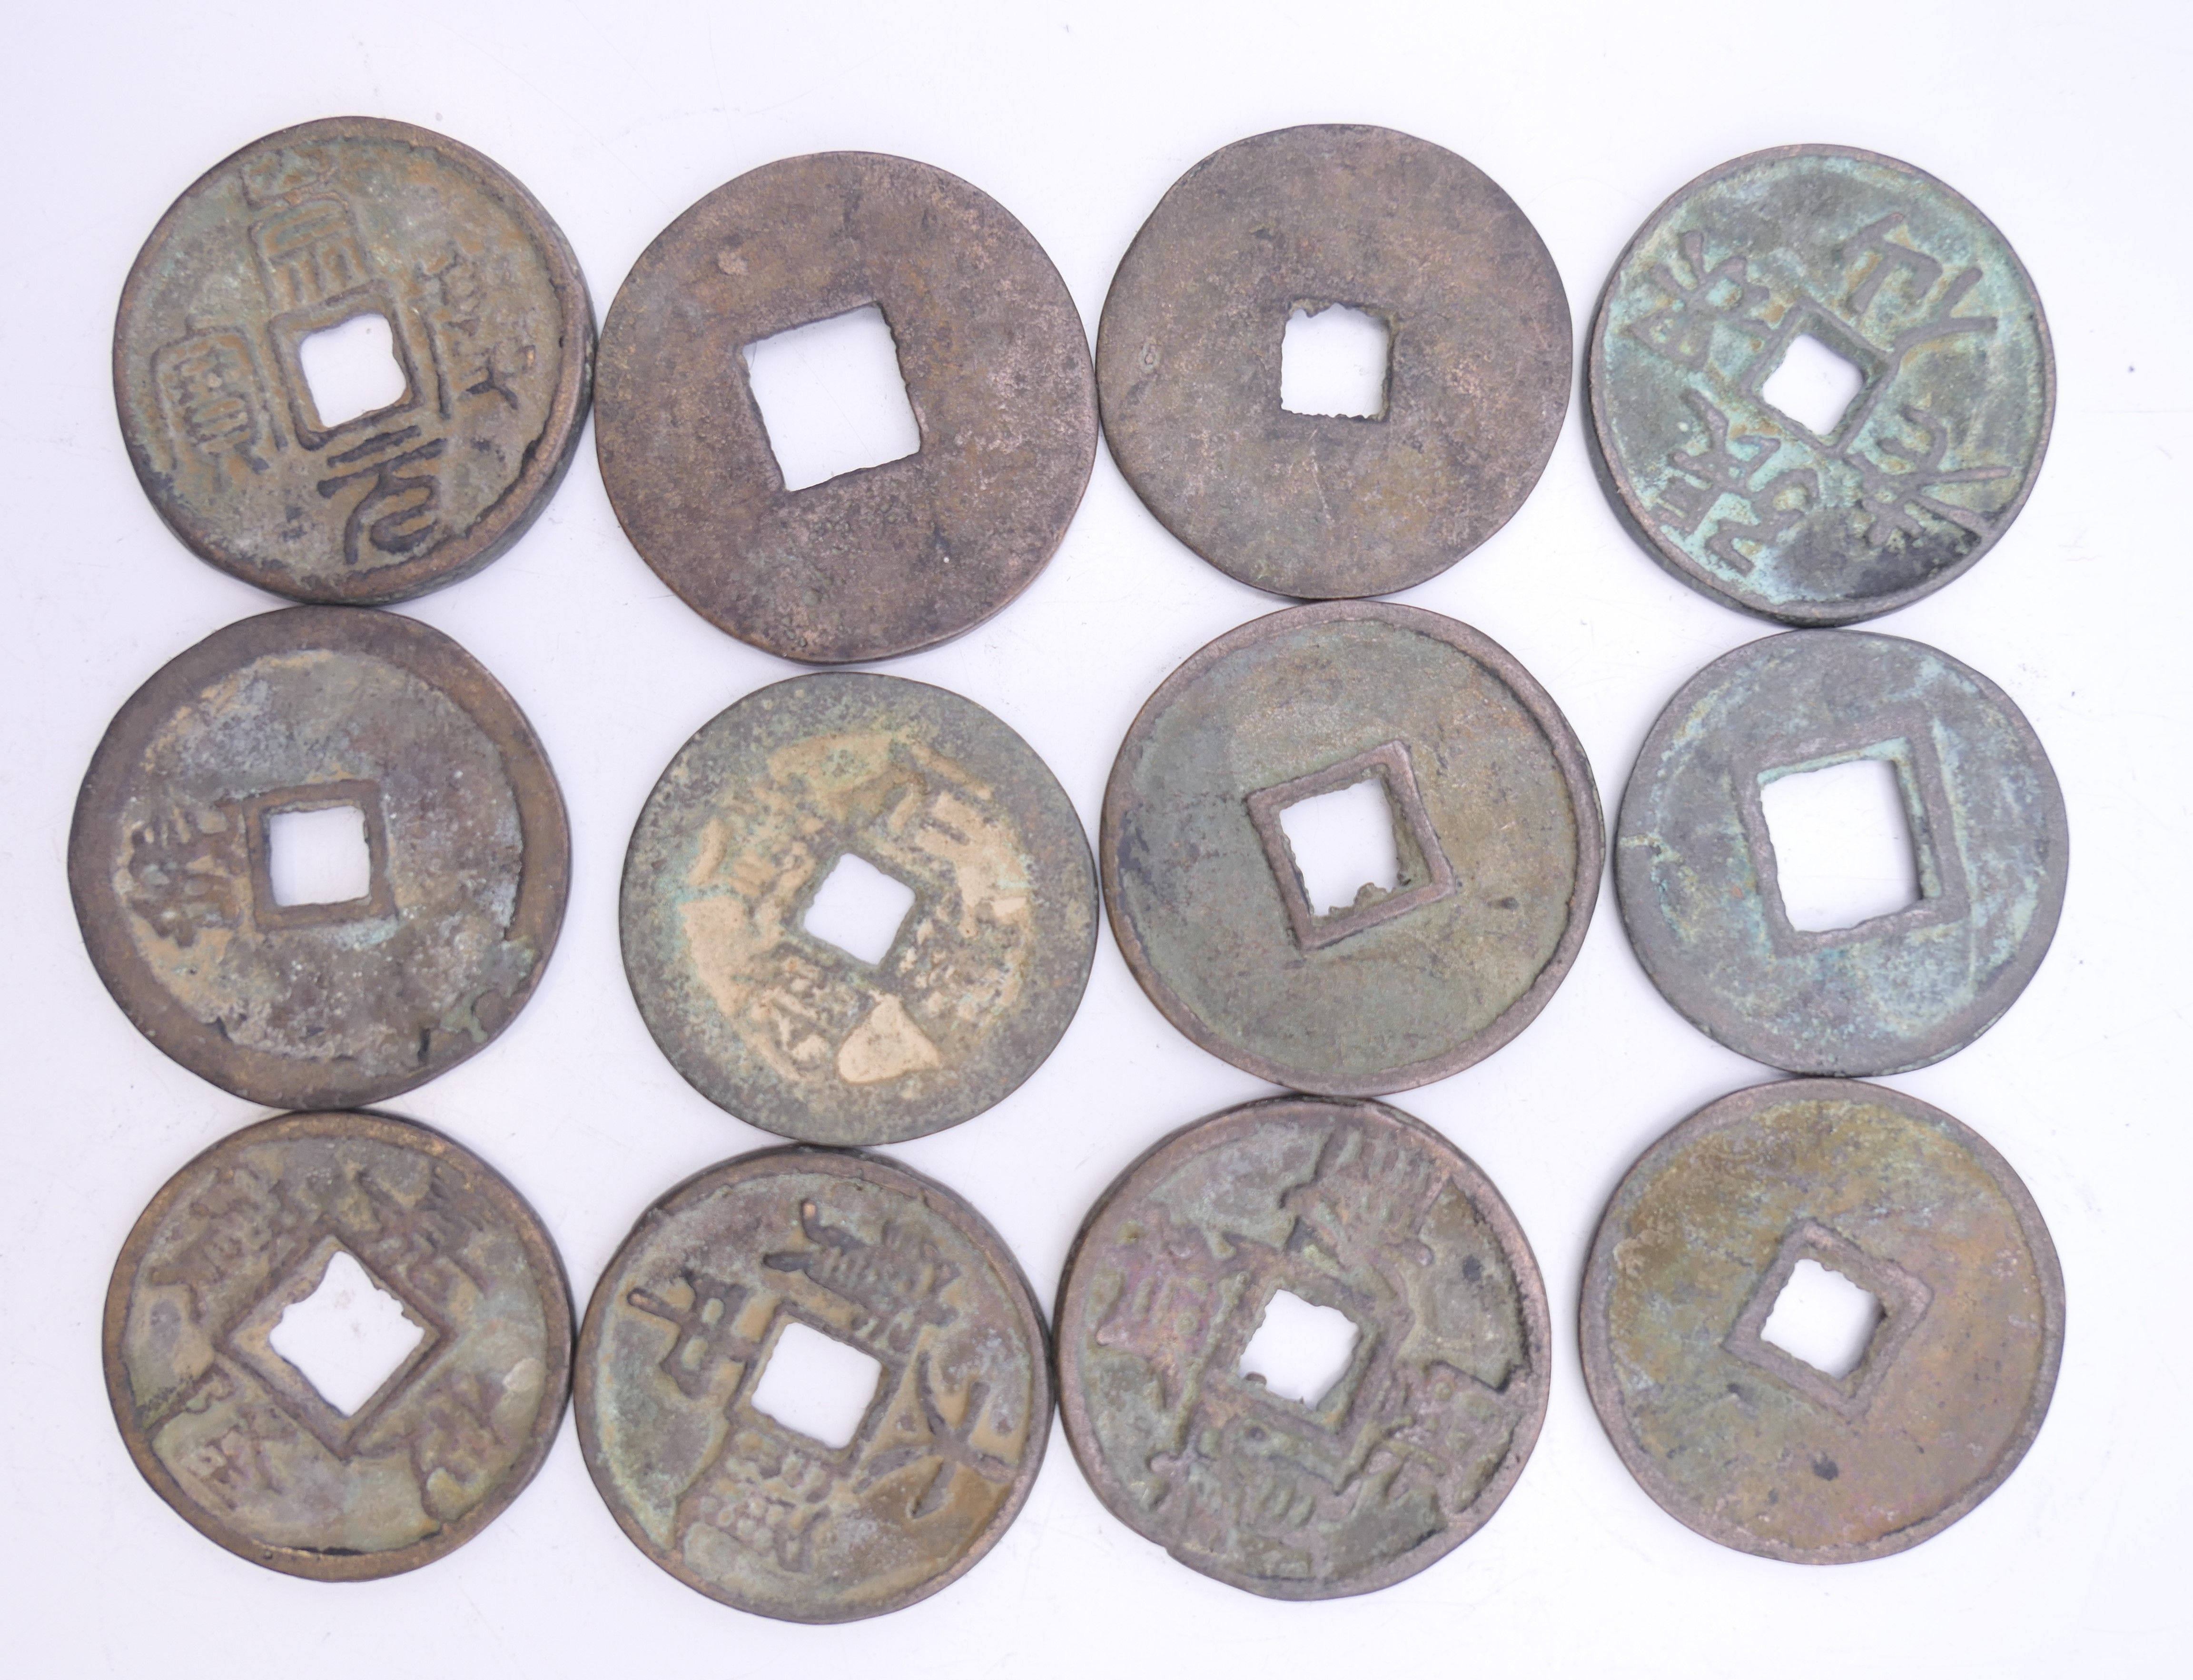 A quantity of Chinese coins. Approximately between 3 cm - 3.5 cm diameter. - Image 2 of 2